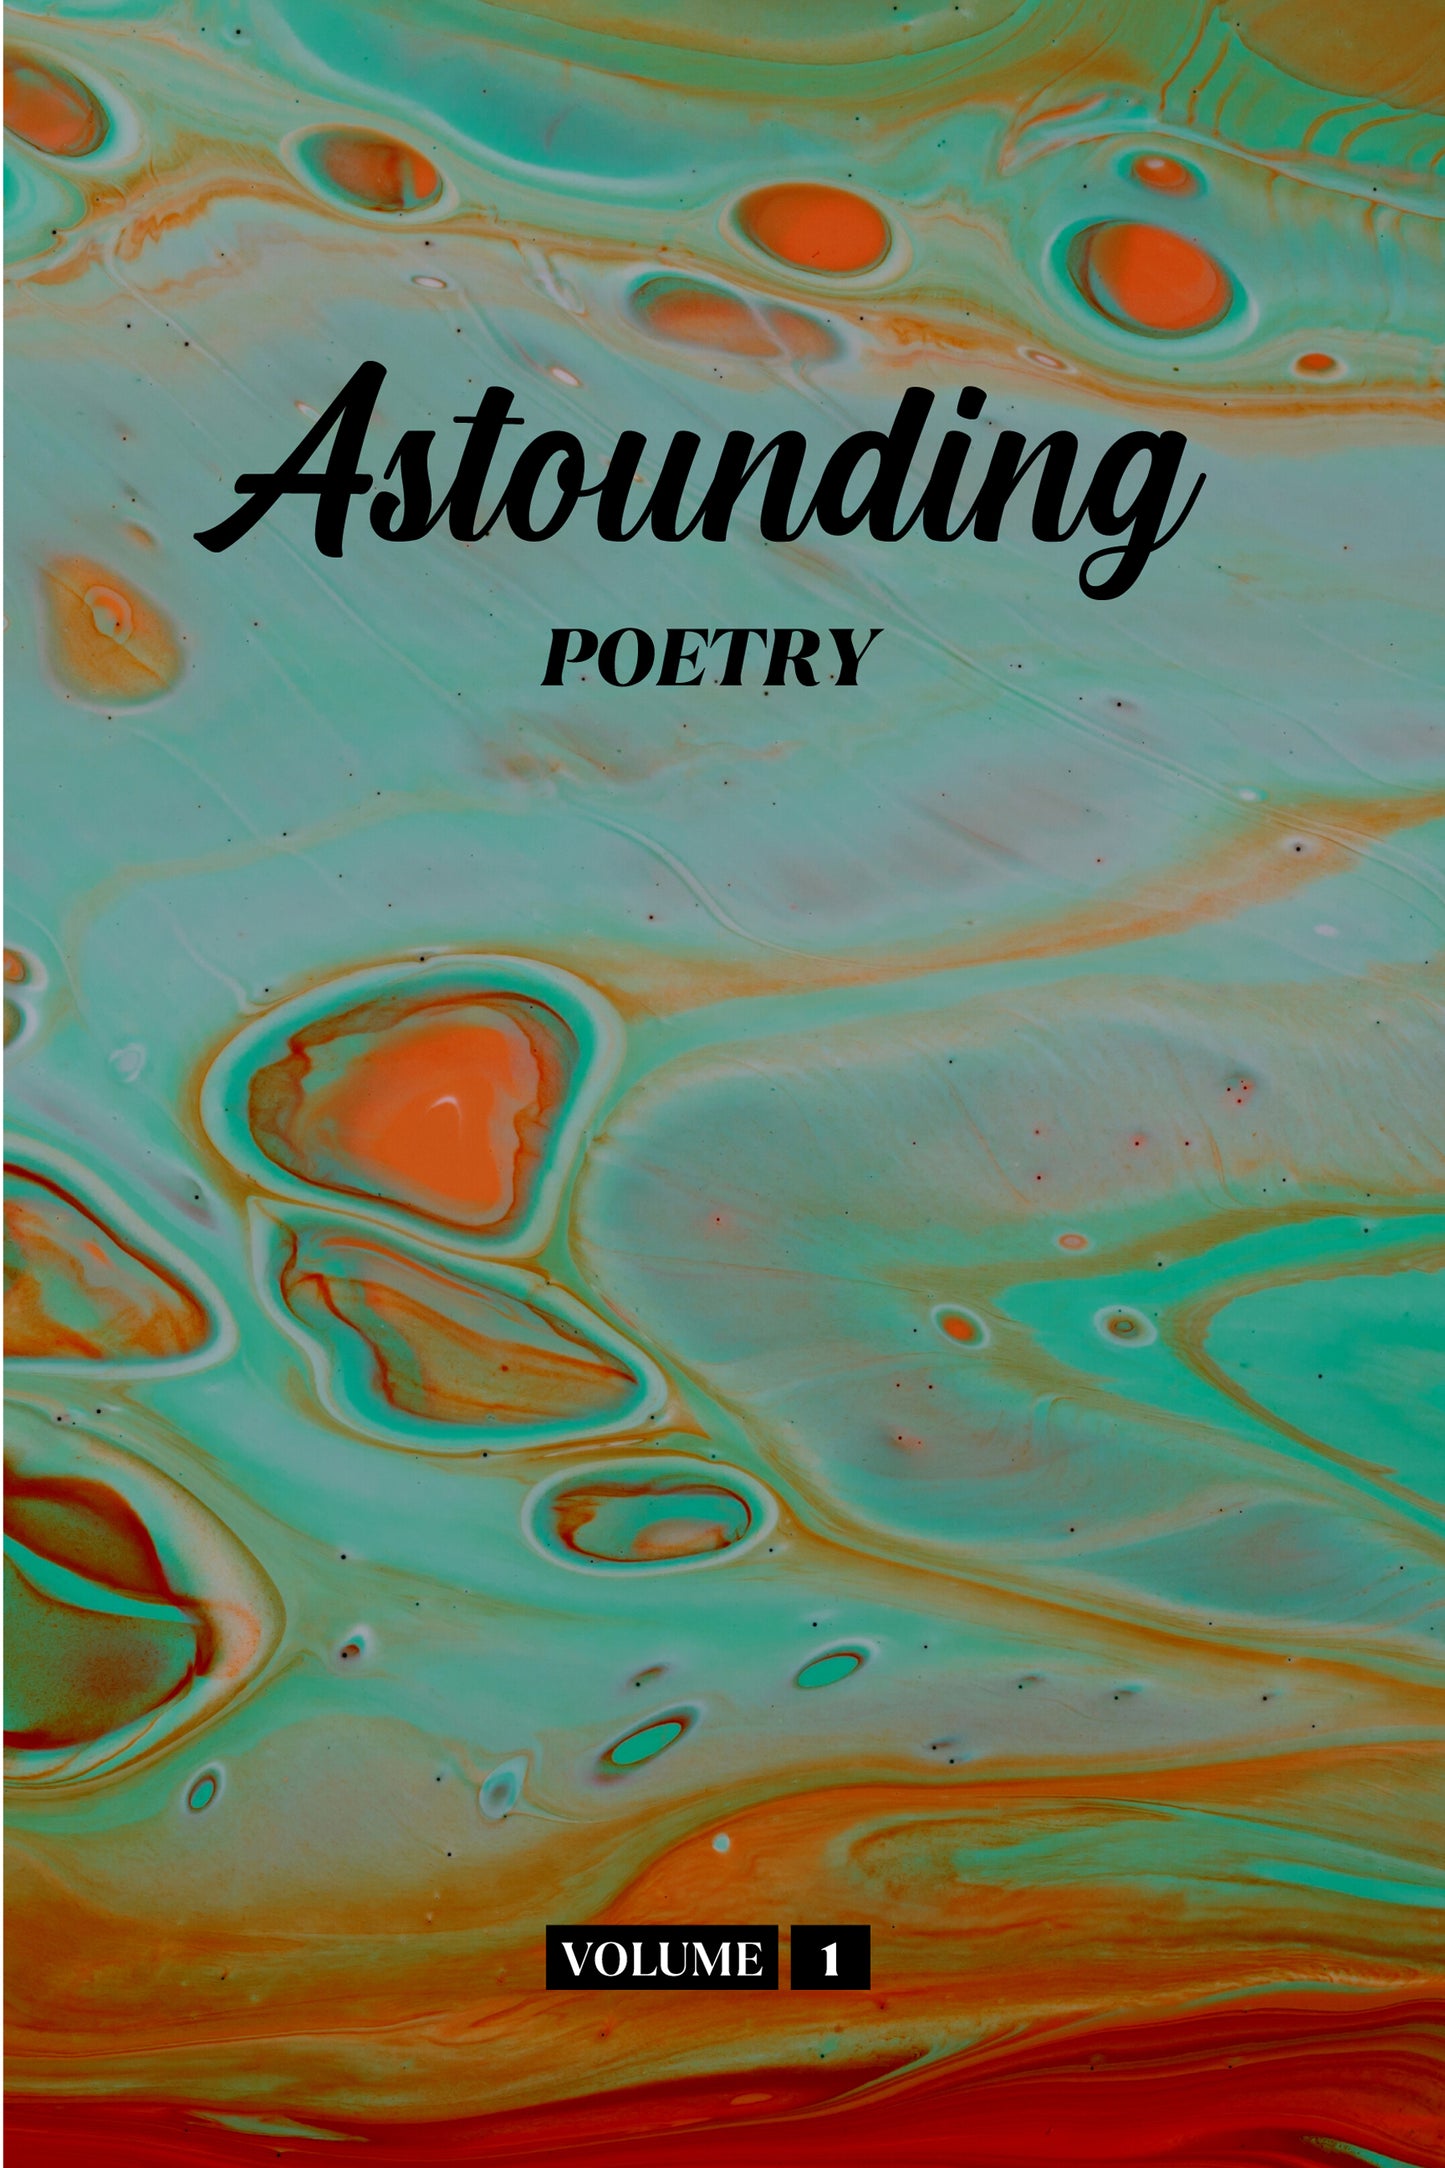 Astounding Poetry (Volume 1) - Physical Book